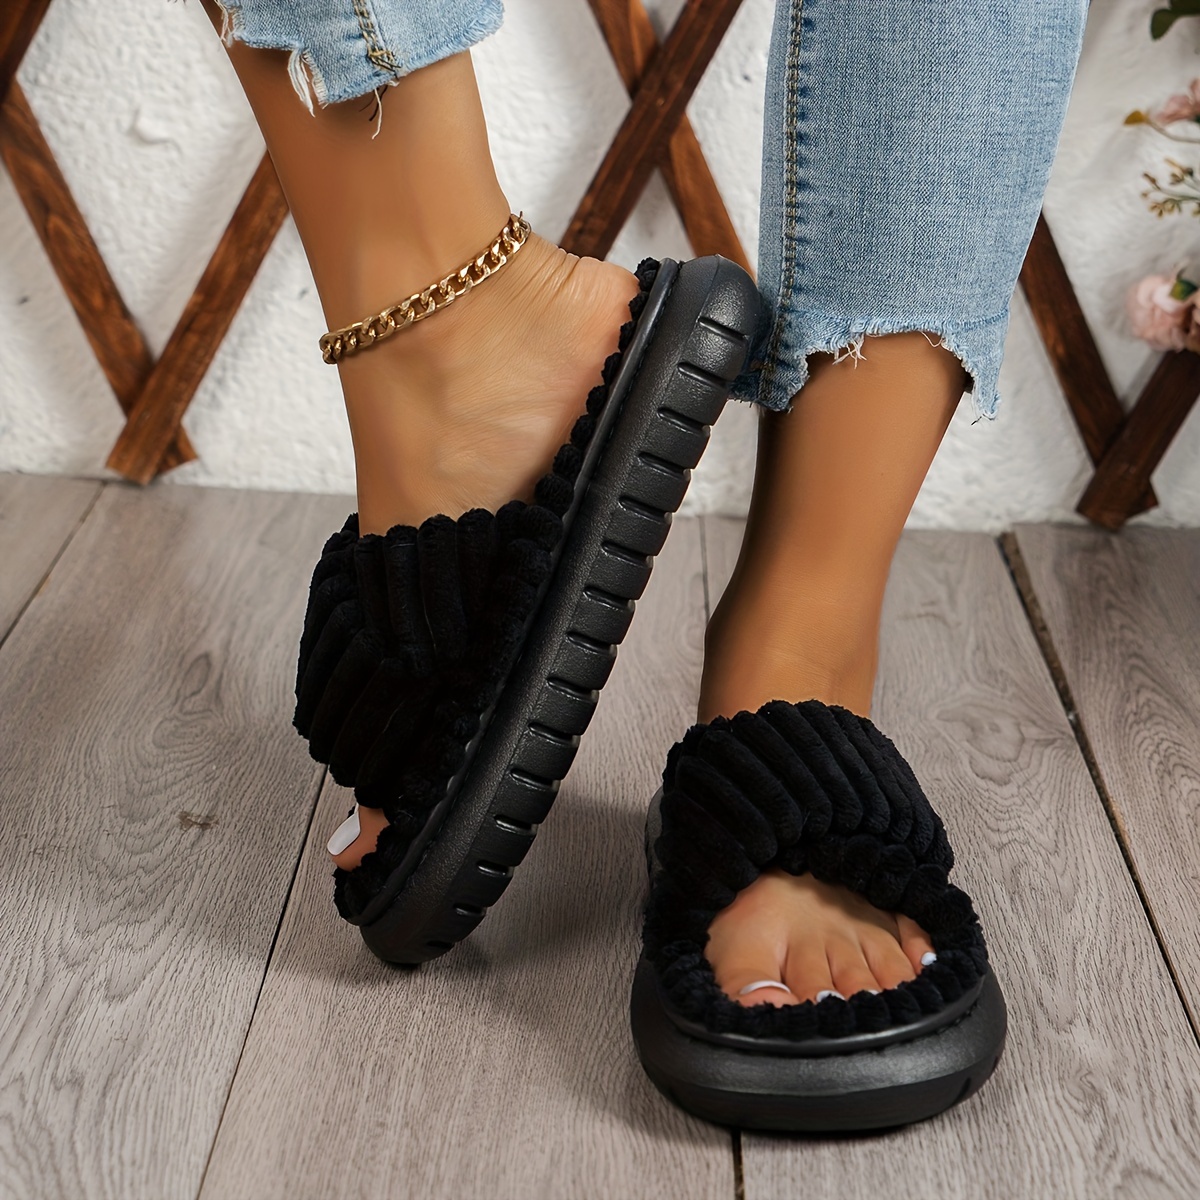 9 Super Comfy Slippers For Women